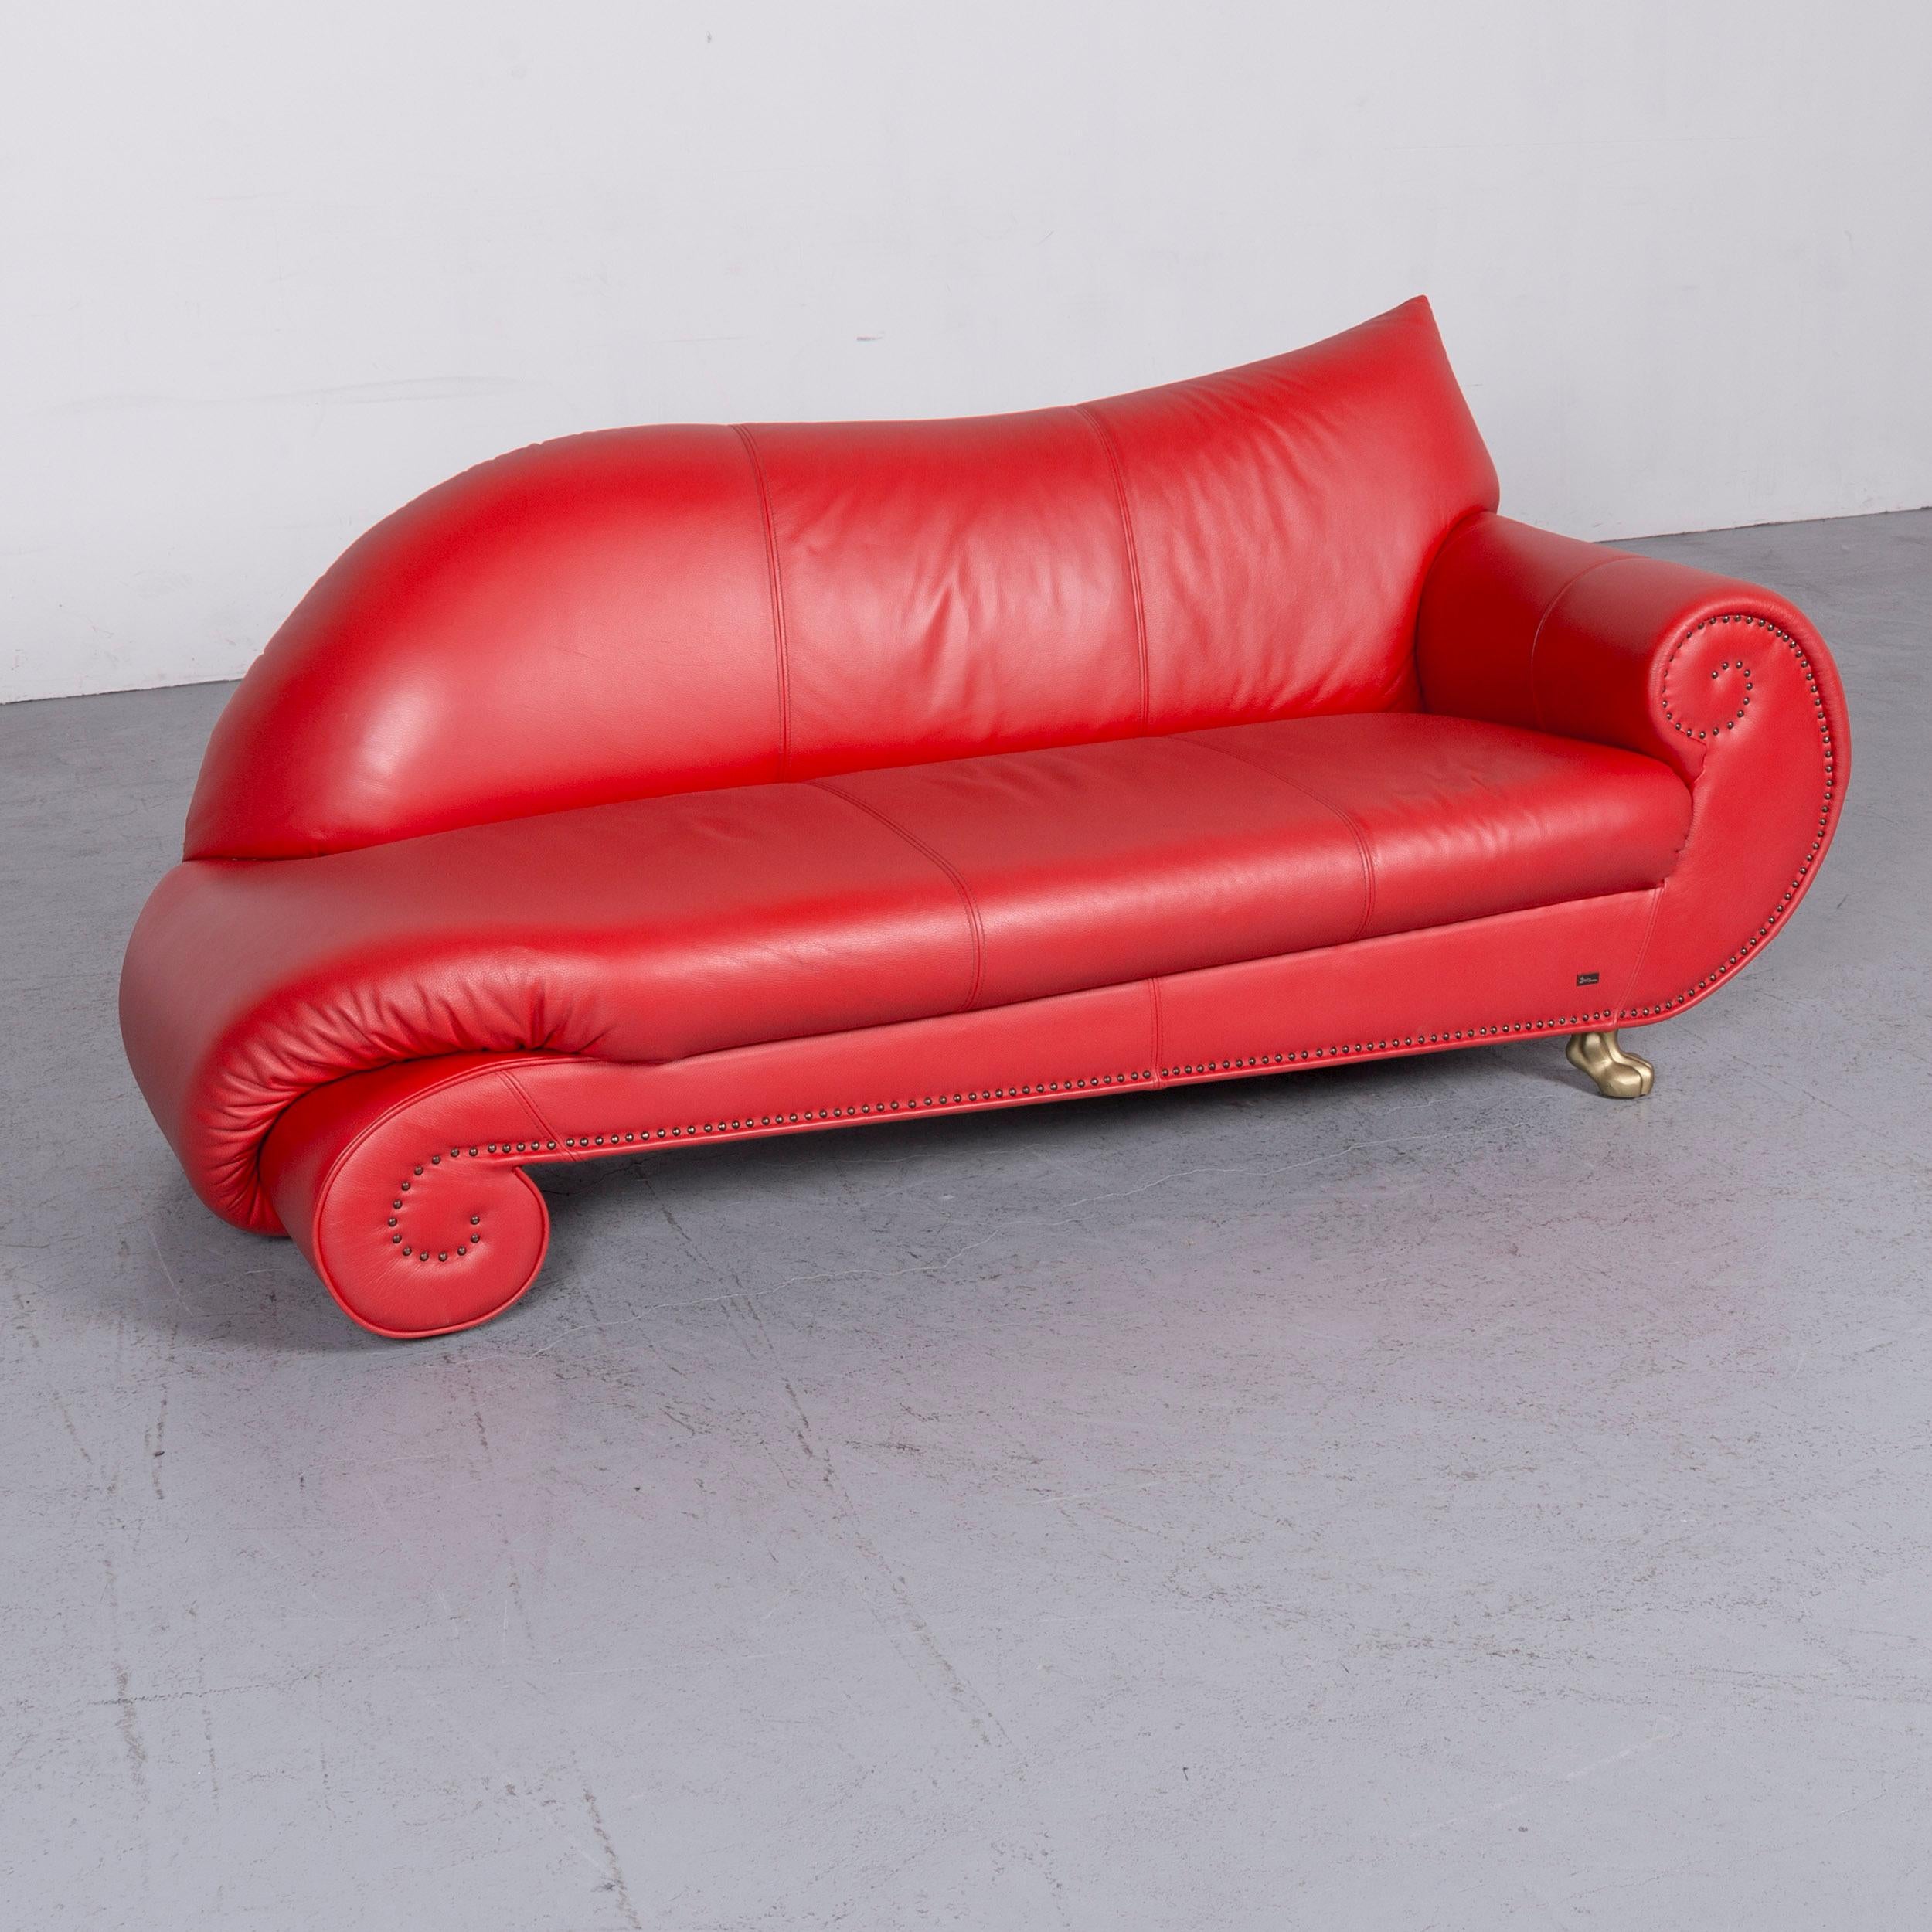 German Bretz Gaudi Designer Leather Sofa Red Three-Seat Couch For Sale